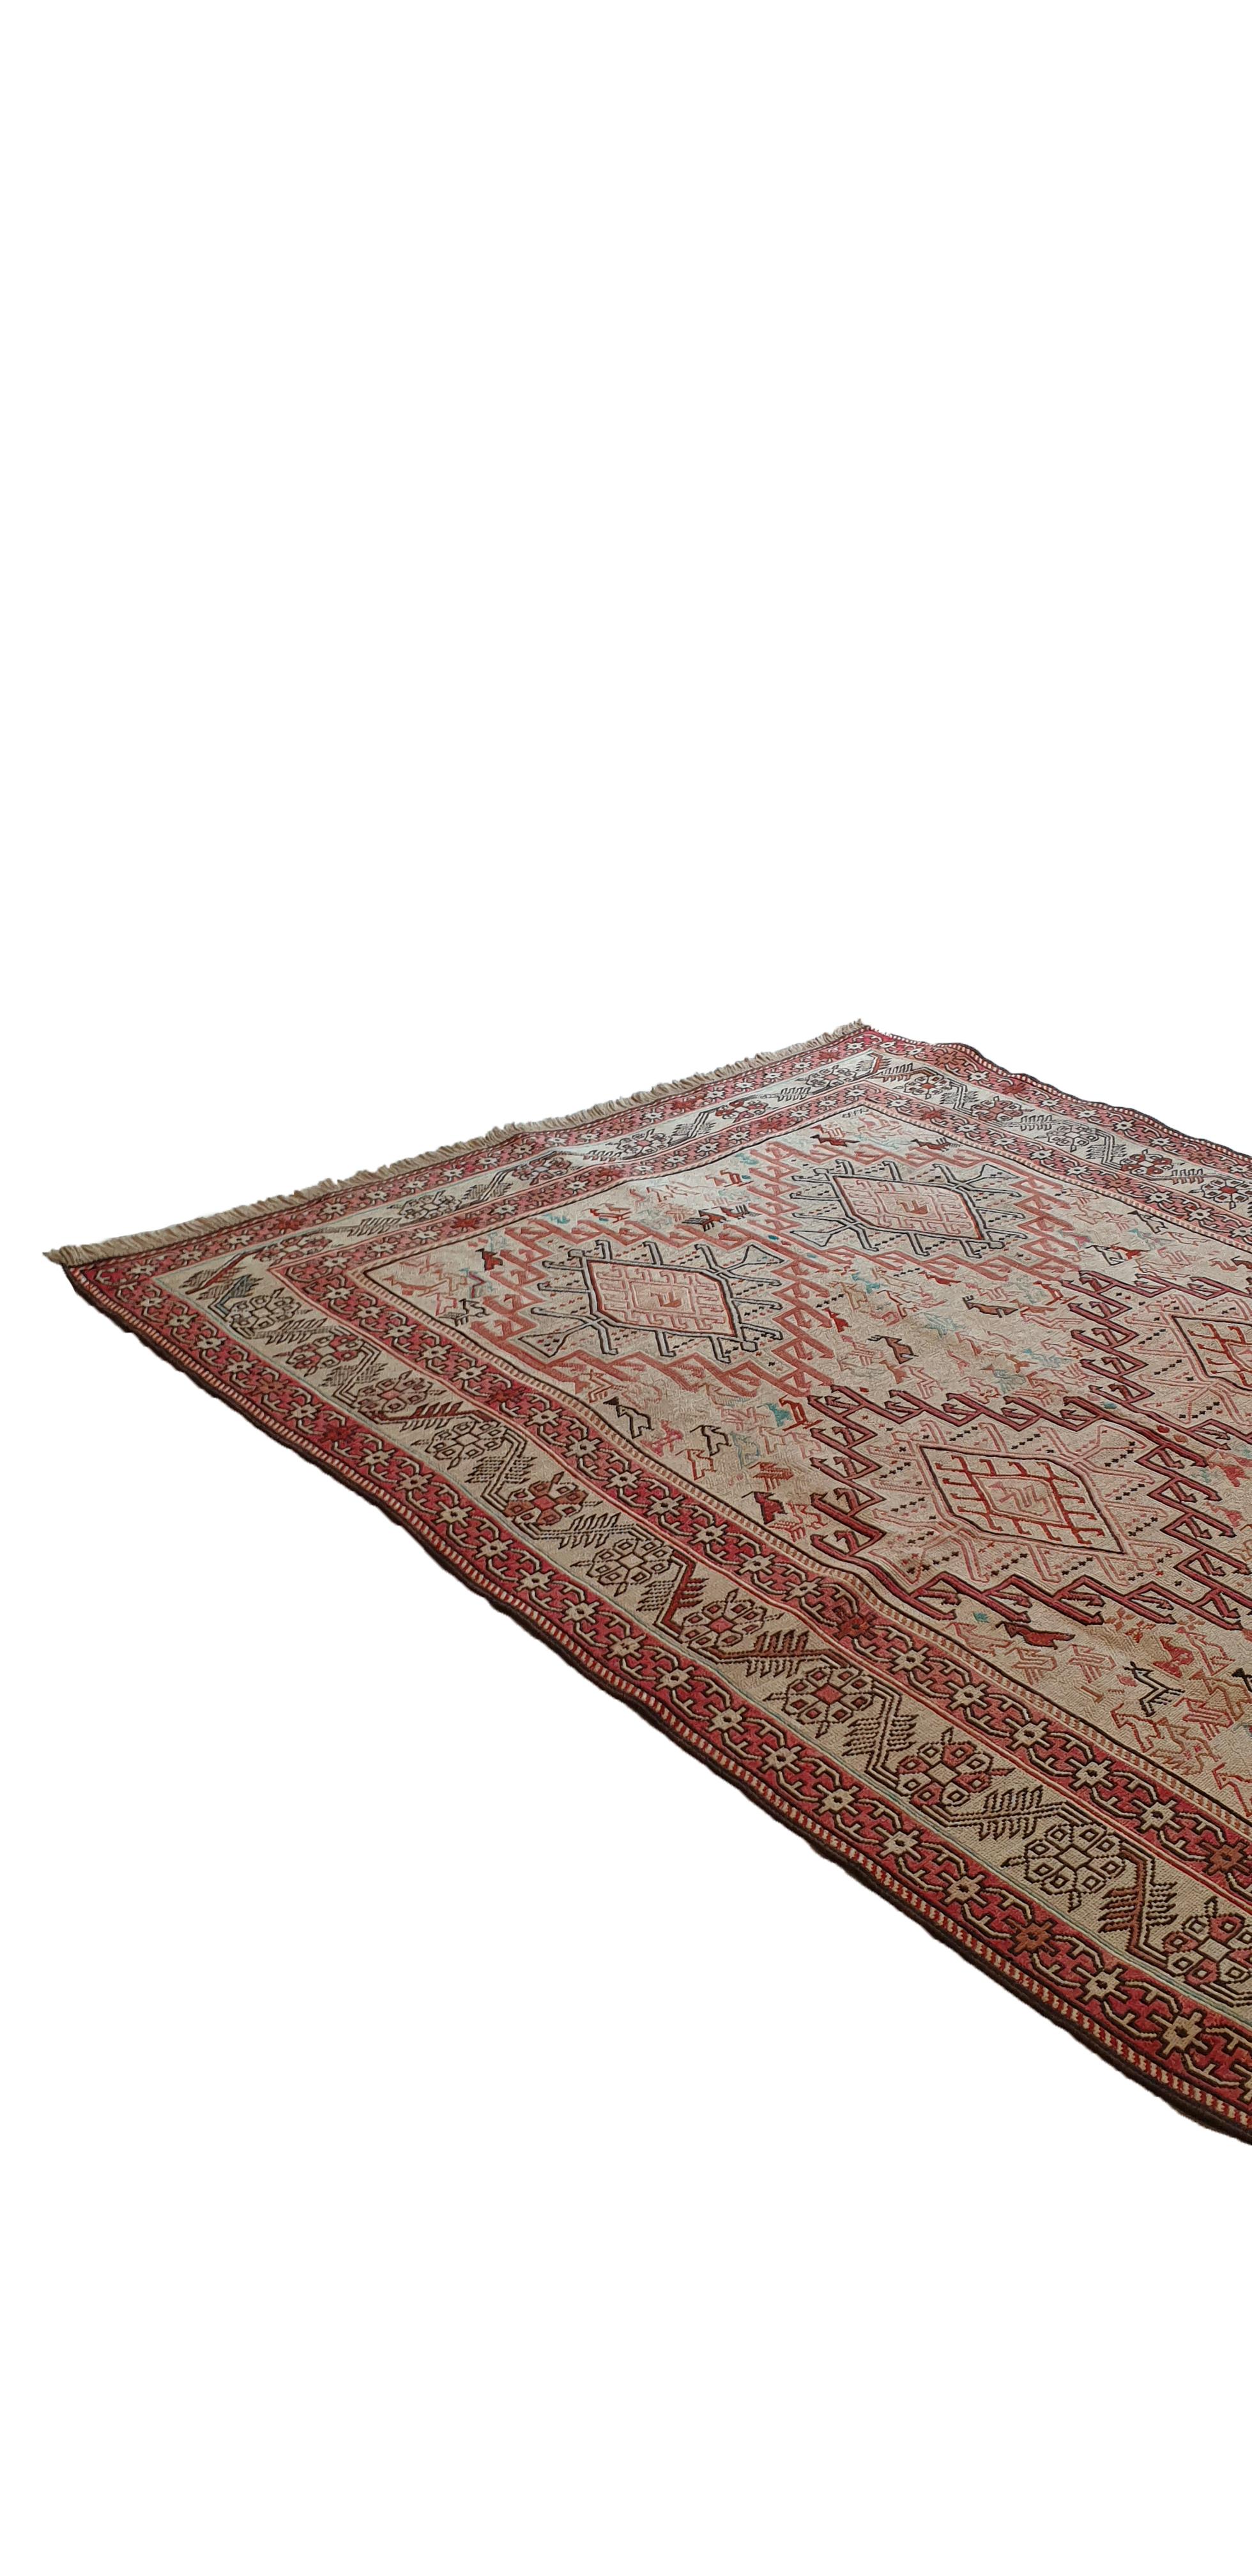 682 - Magnificent Kilim Embroidered with Wool and Silk from the Caucasus For Sale 1